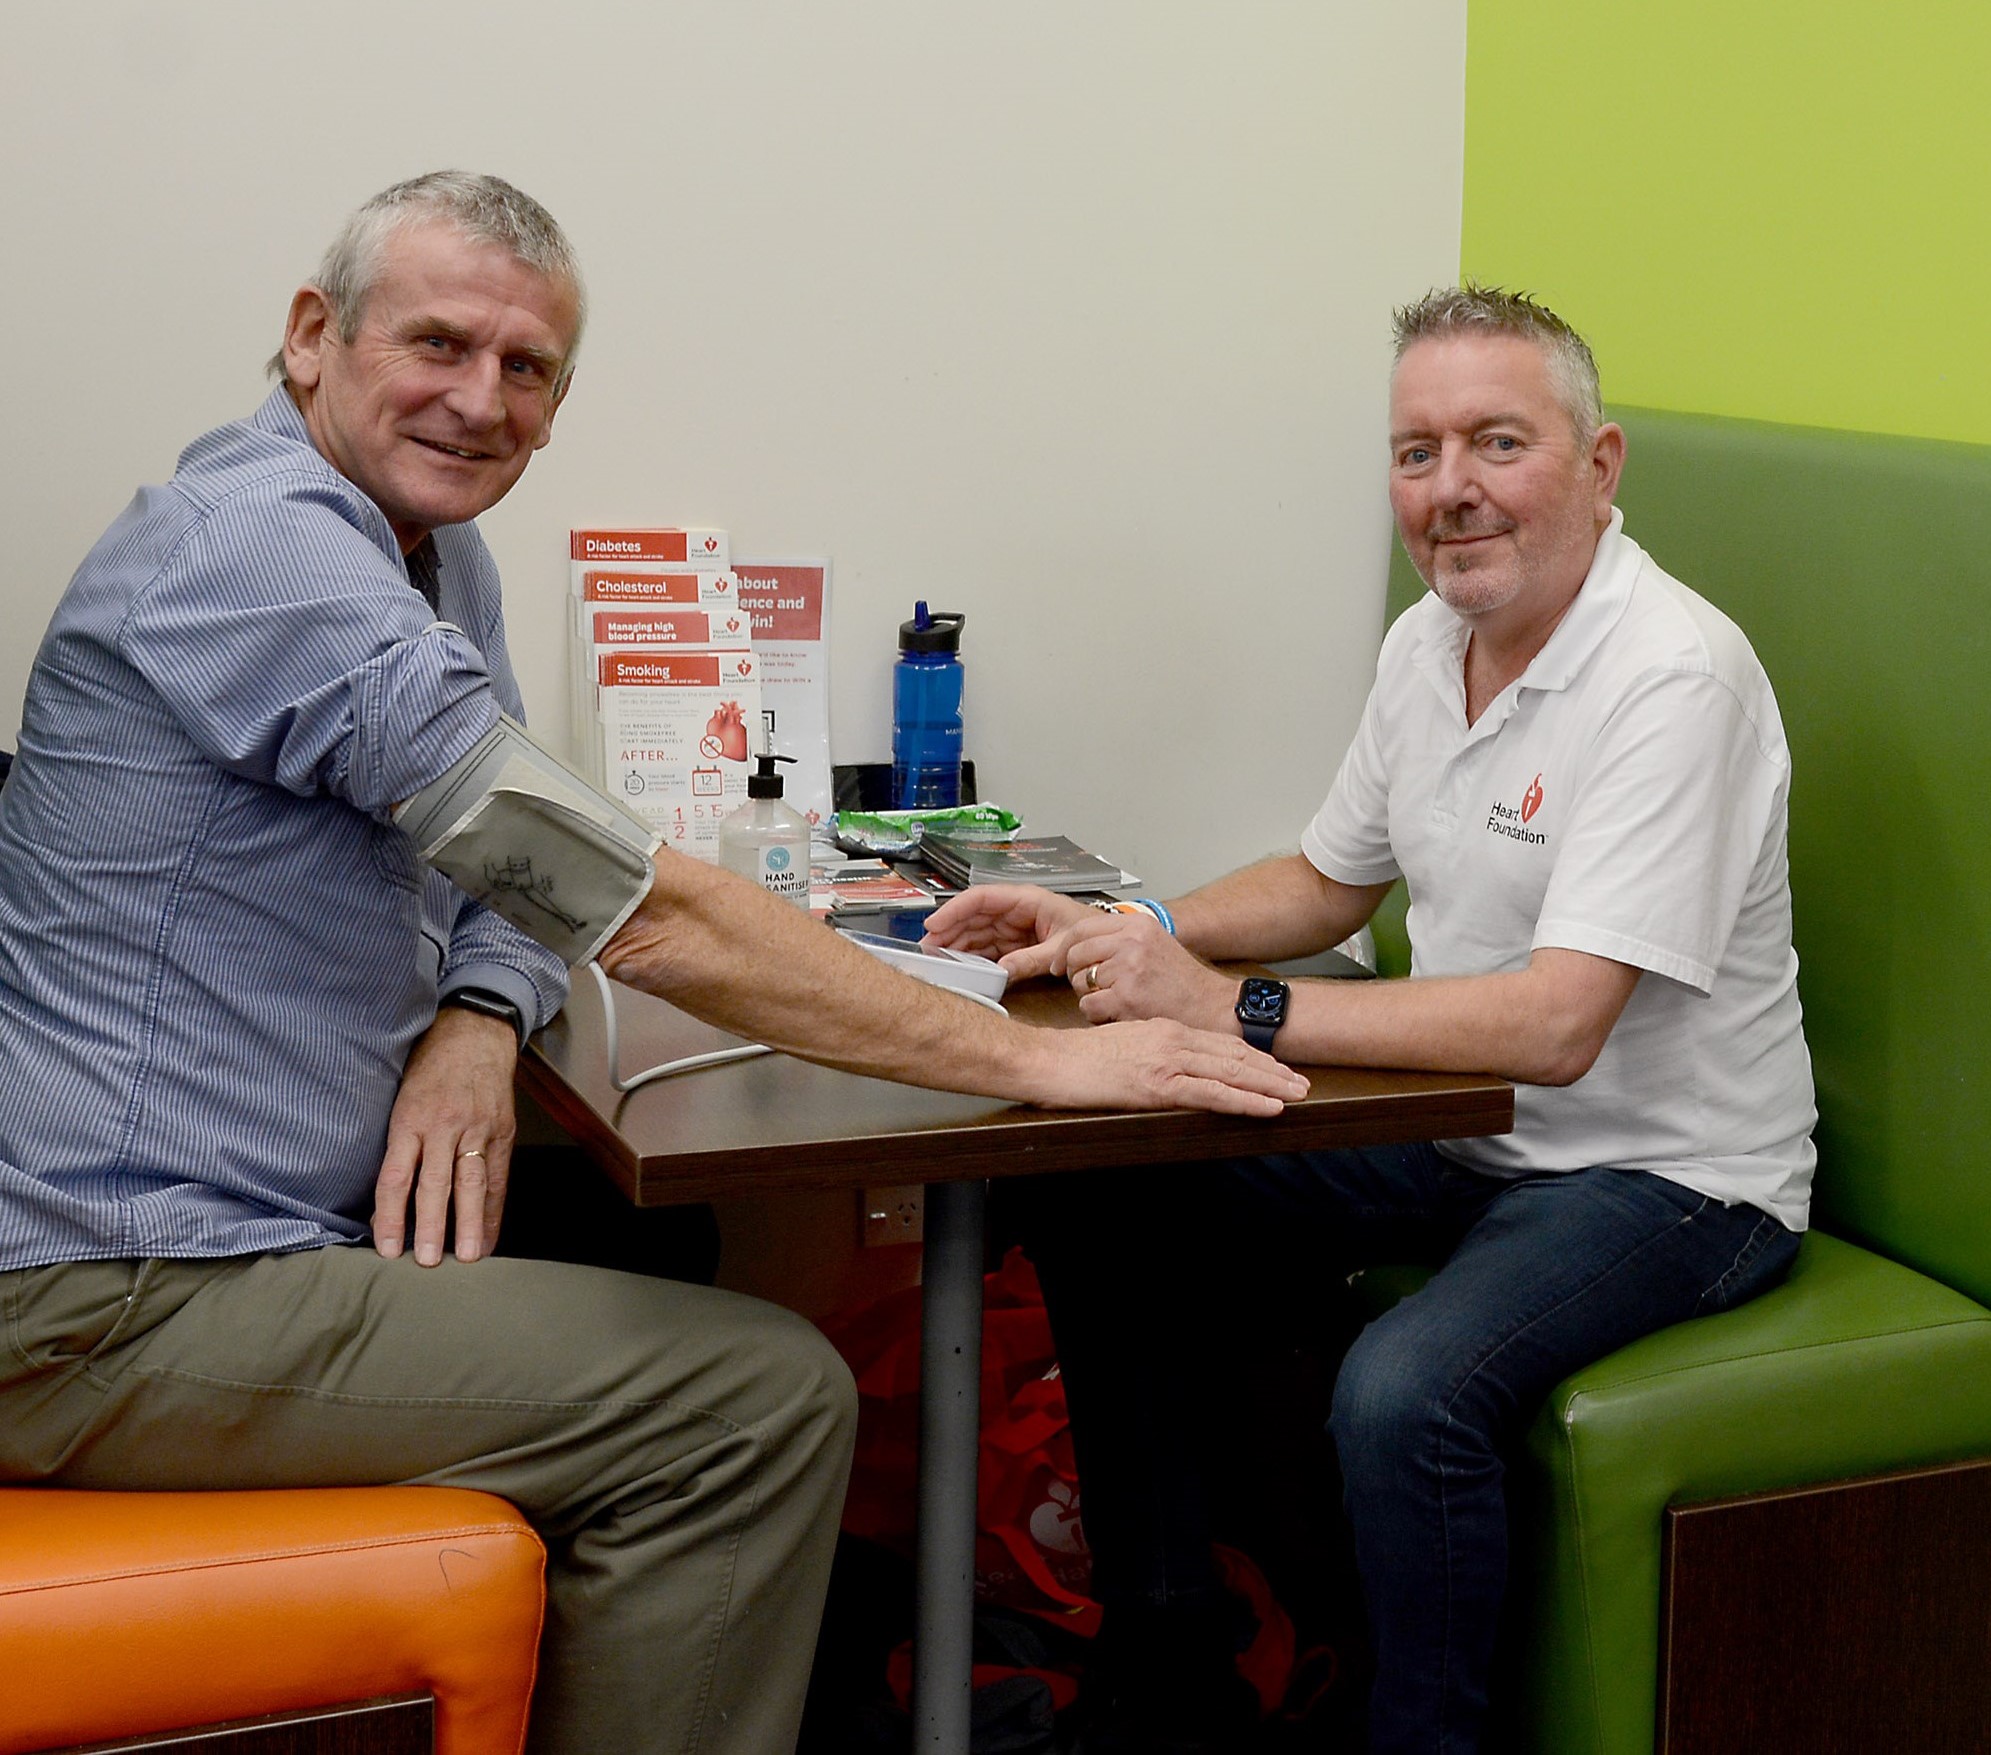 Deputy Mayor Kevin Taylor (left) has a check up with the Heart Foundation's Fraser Heron.